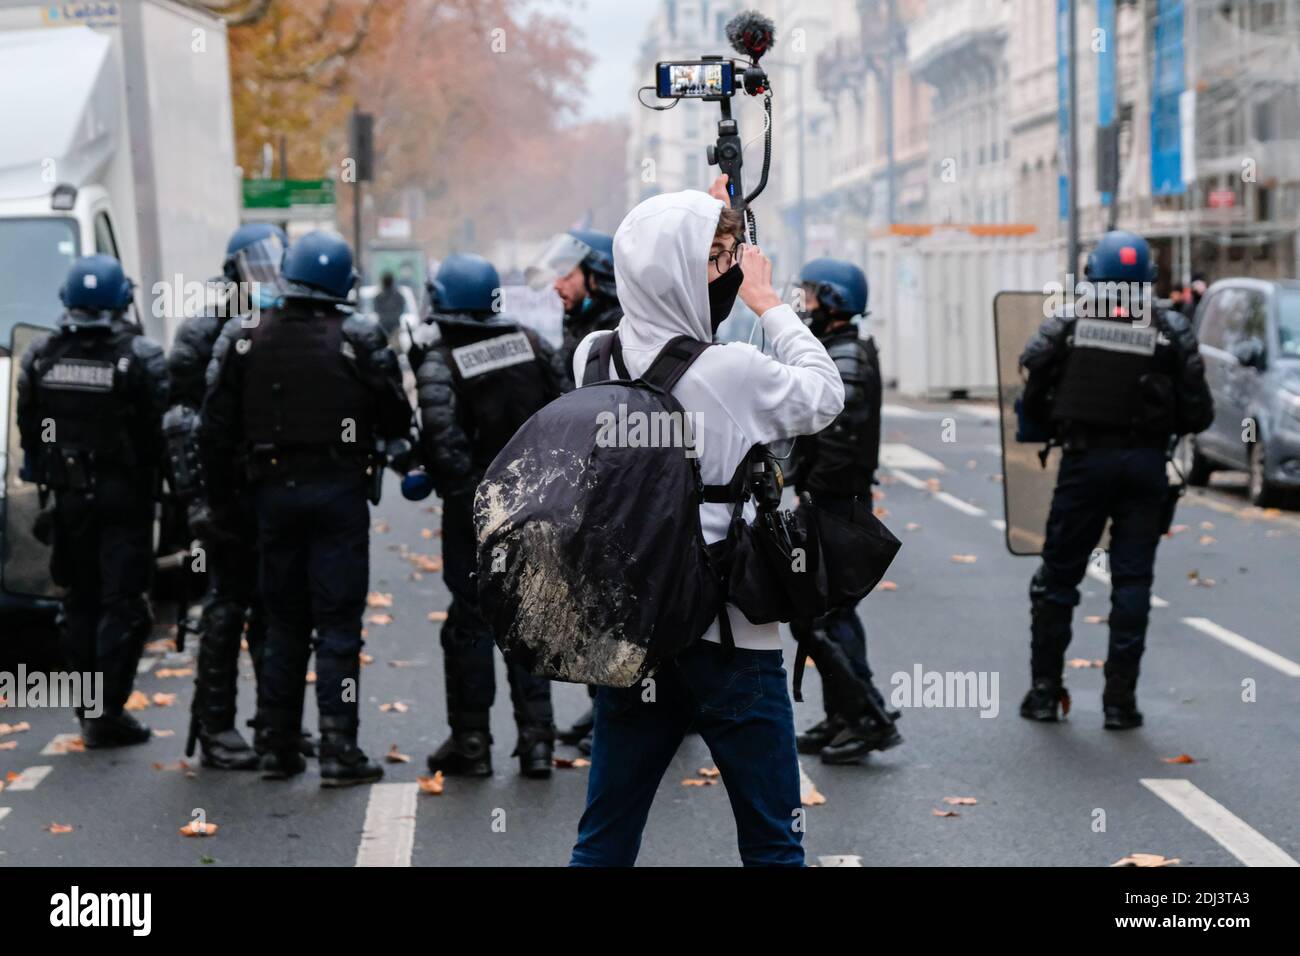 Lyon (France), 12 December 2020. 2000 demonstrators according to the Rhône prefecture for this new pride march in Lyon. Journalist filming the police. Stock Photo